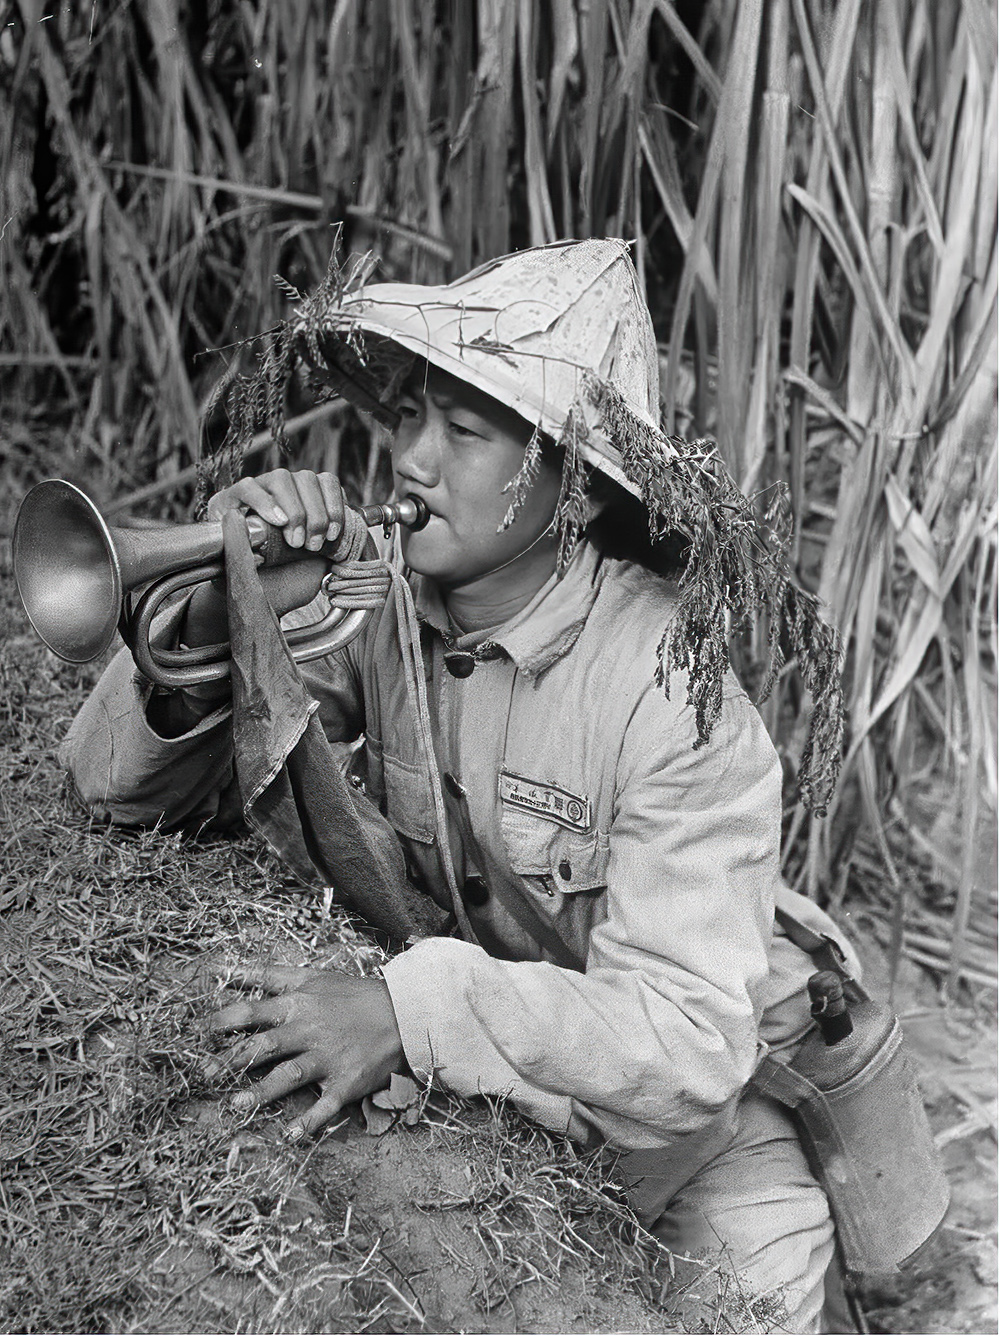 Chinese soldier blowing bugle, c. 1950. | LIFE Photo Collection
